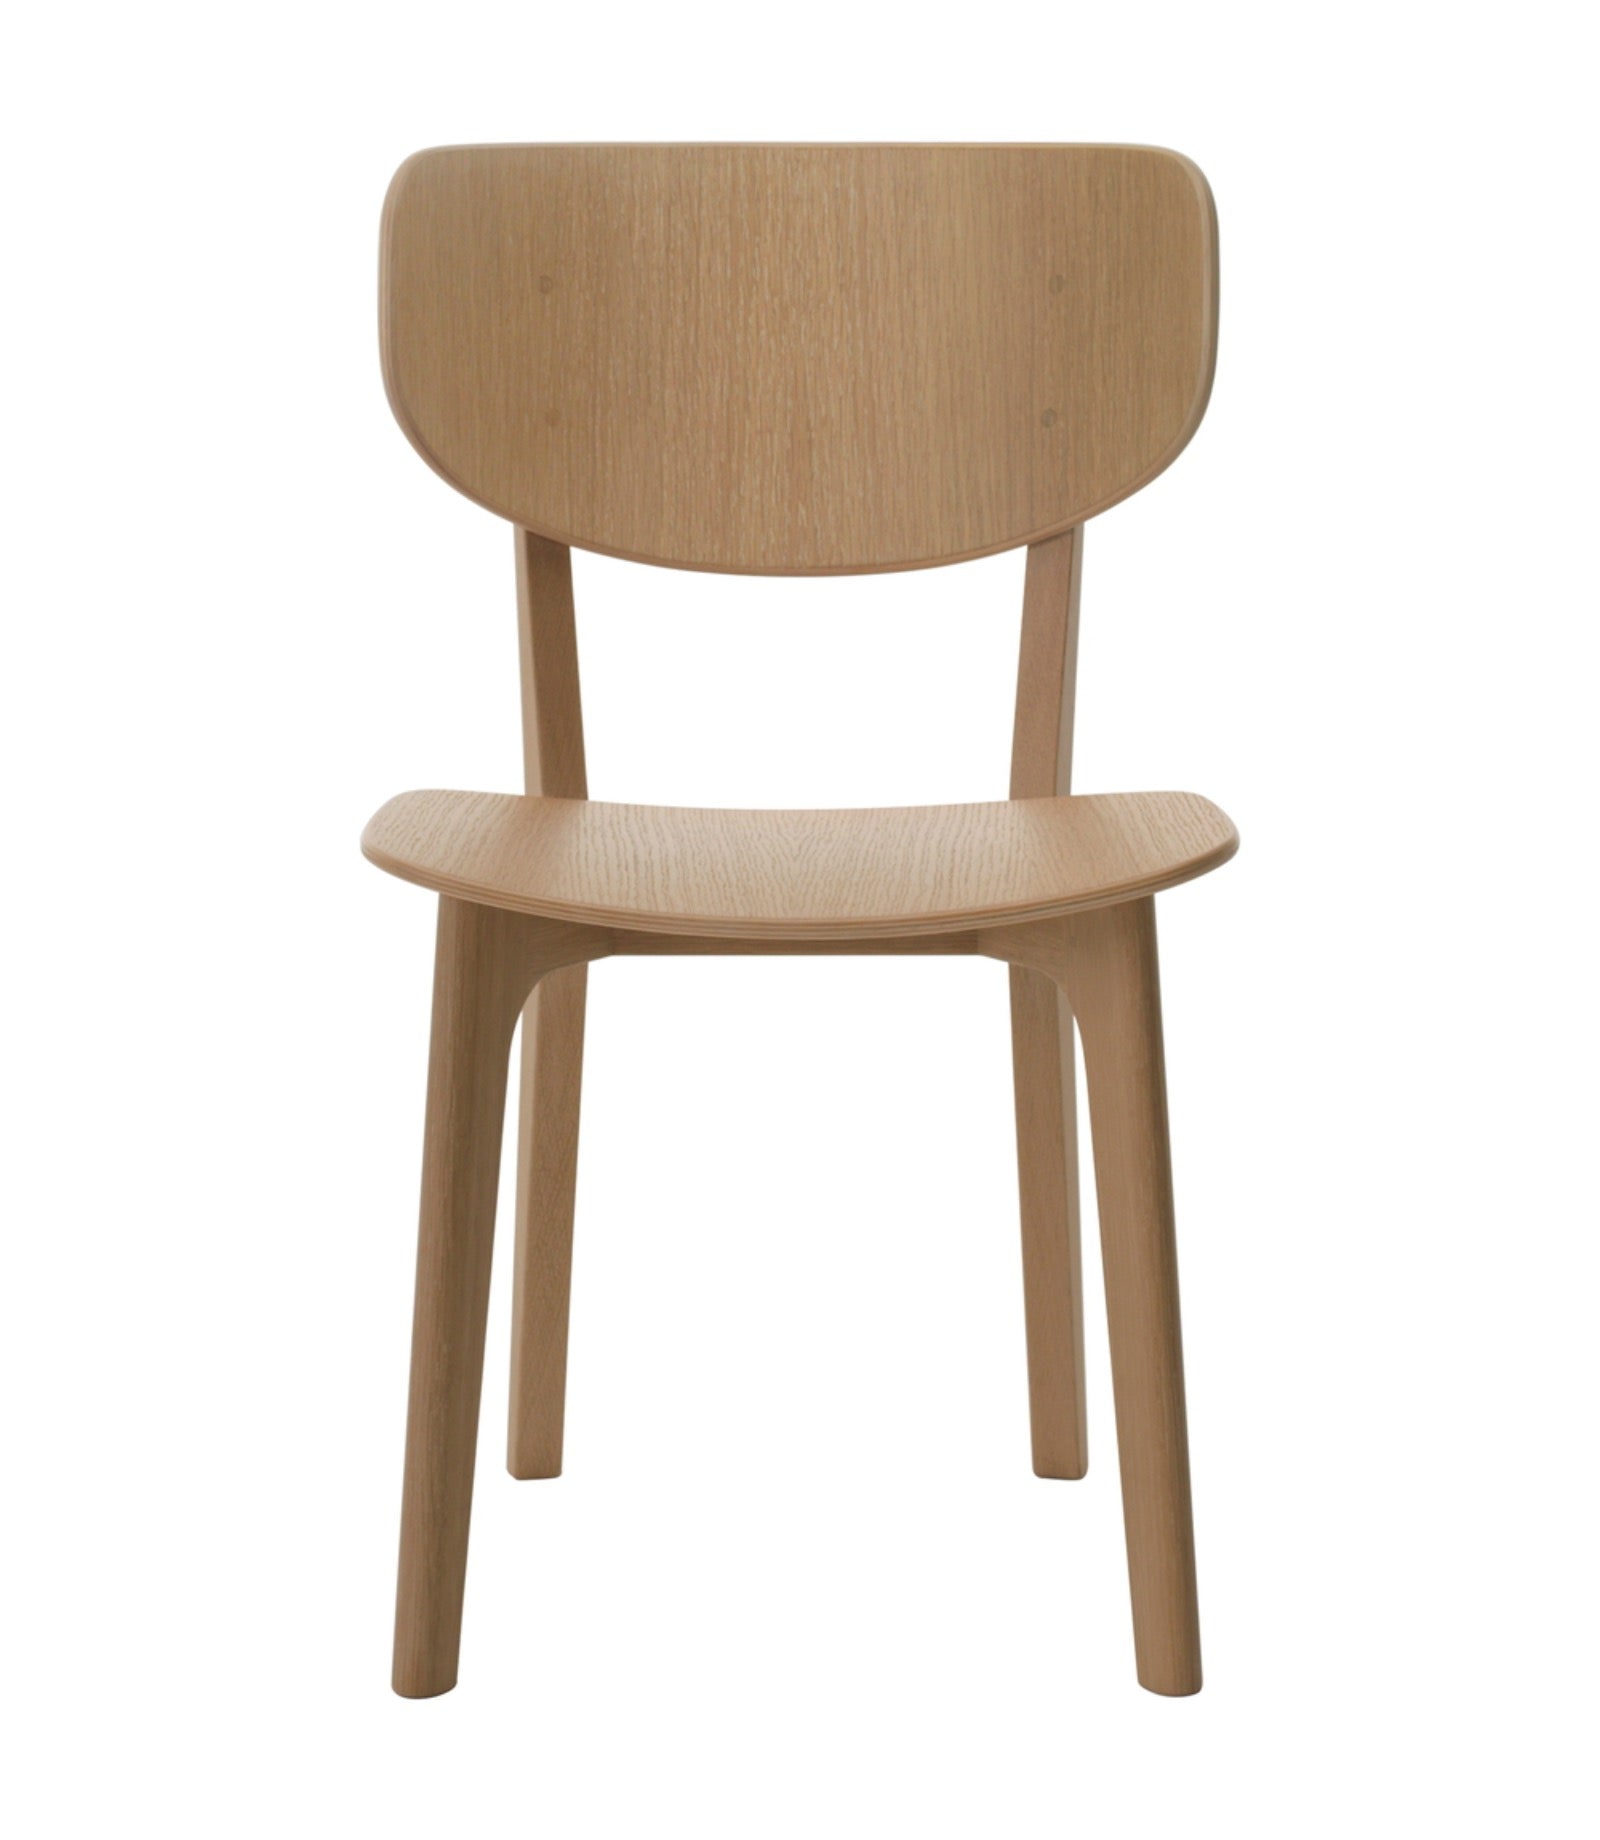 Roundish Chair Wooden Seat